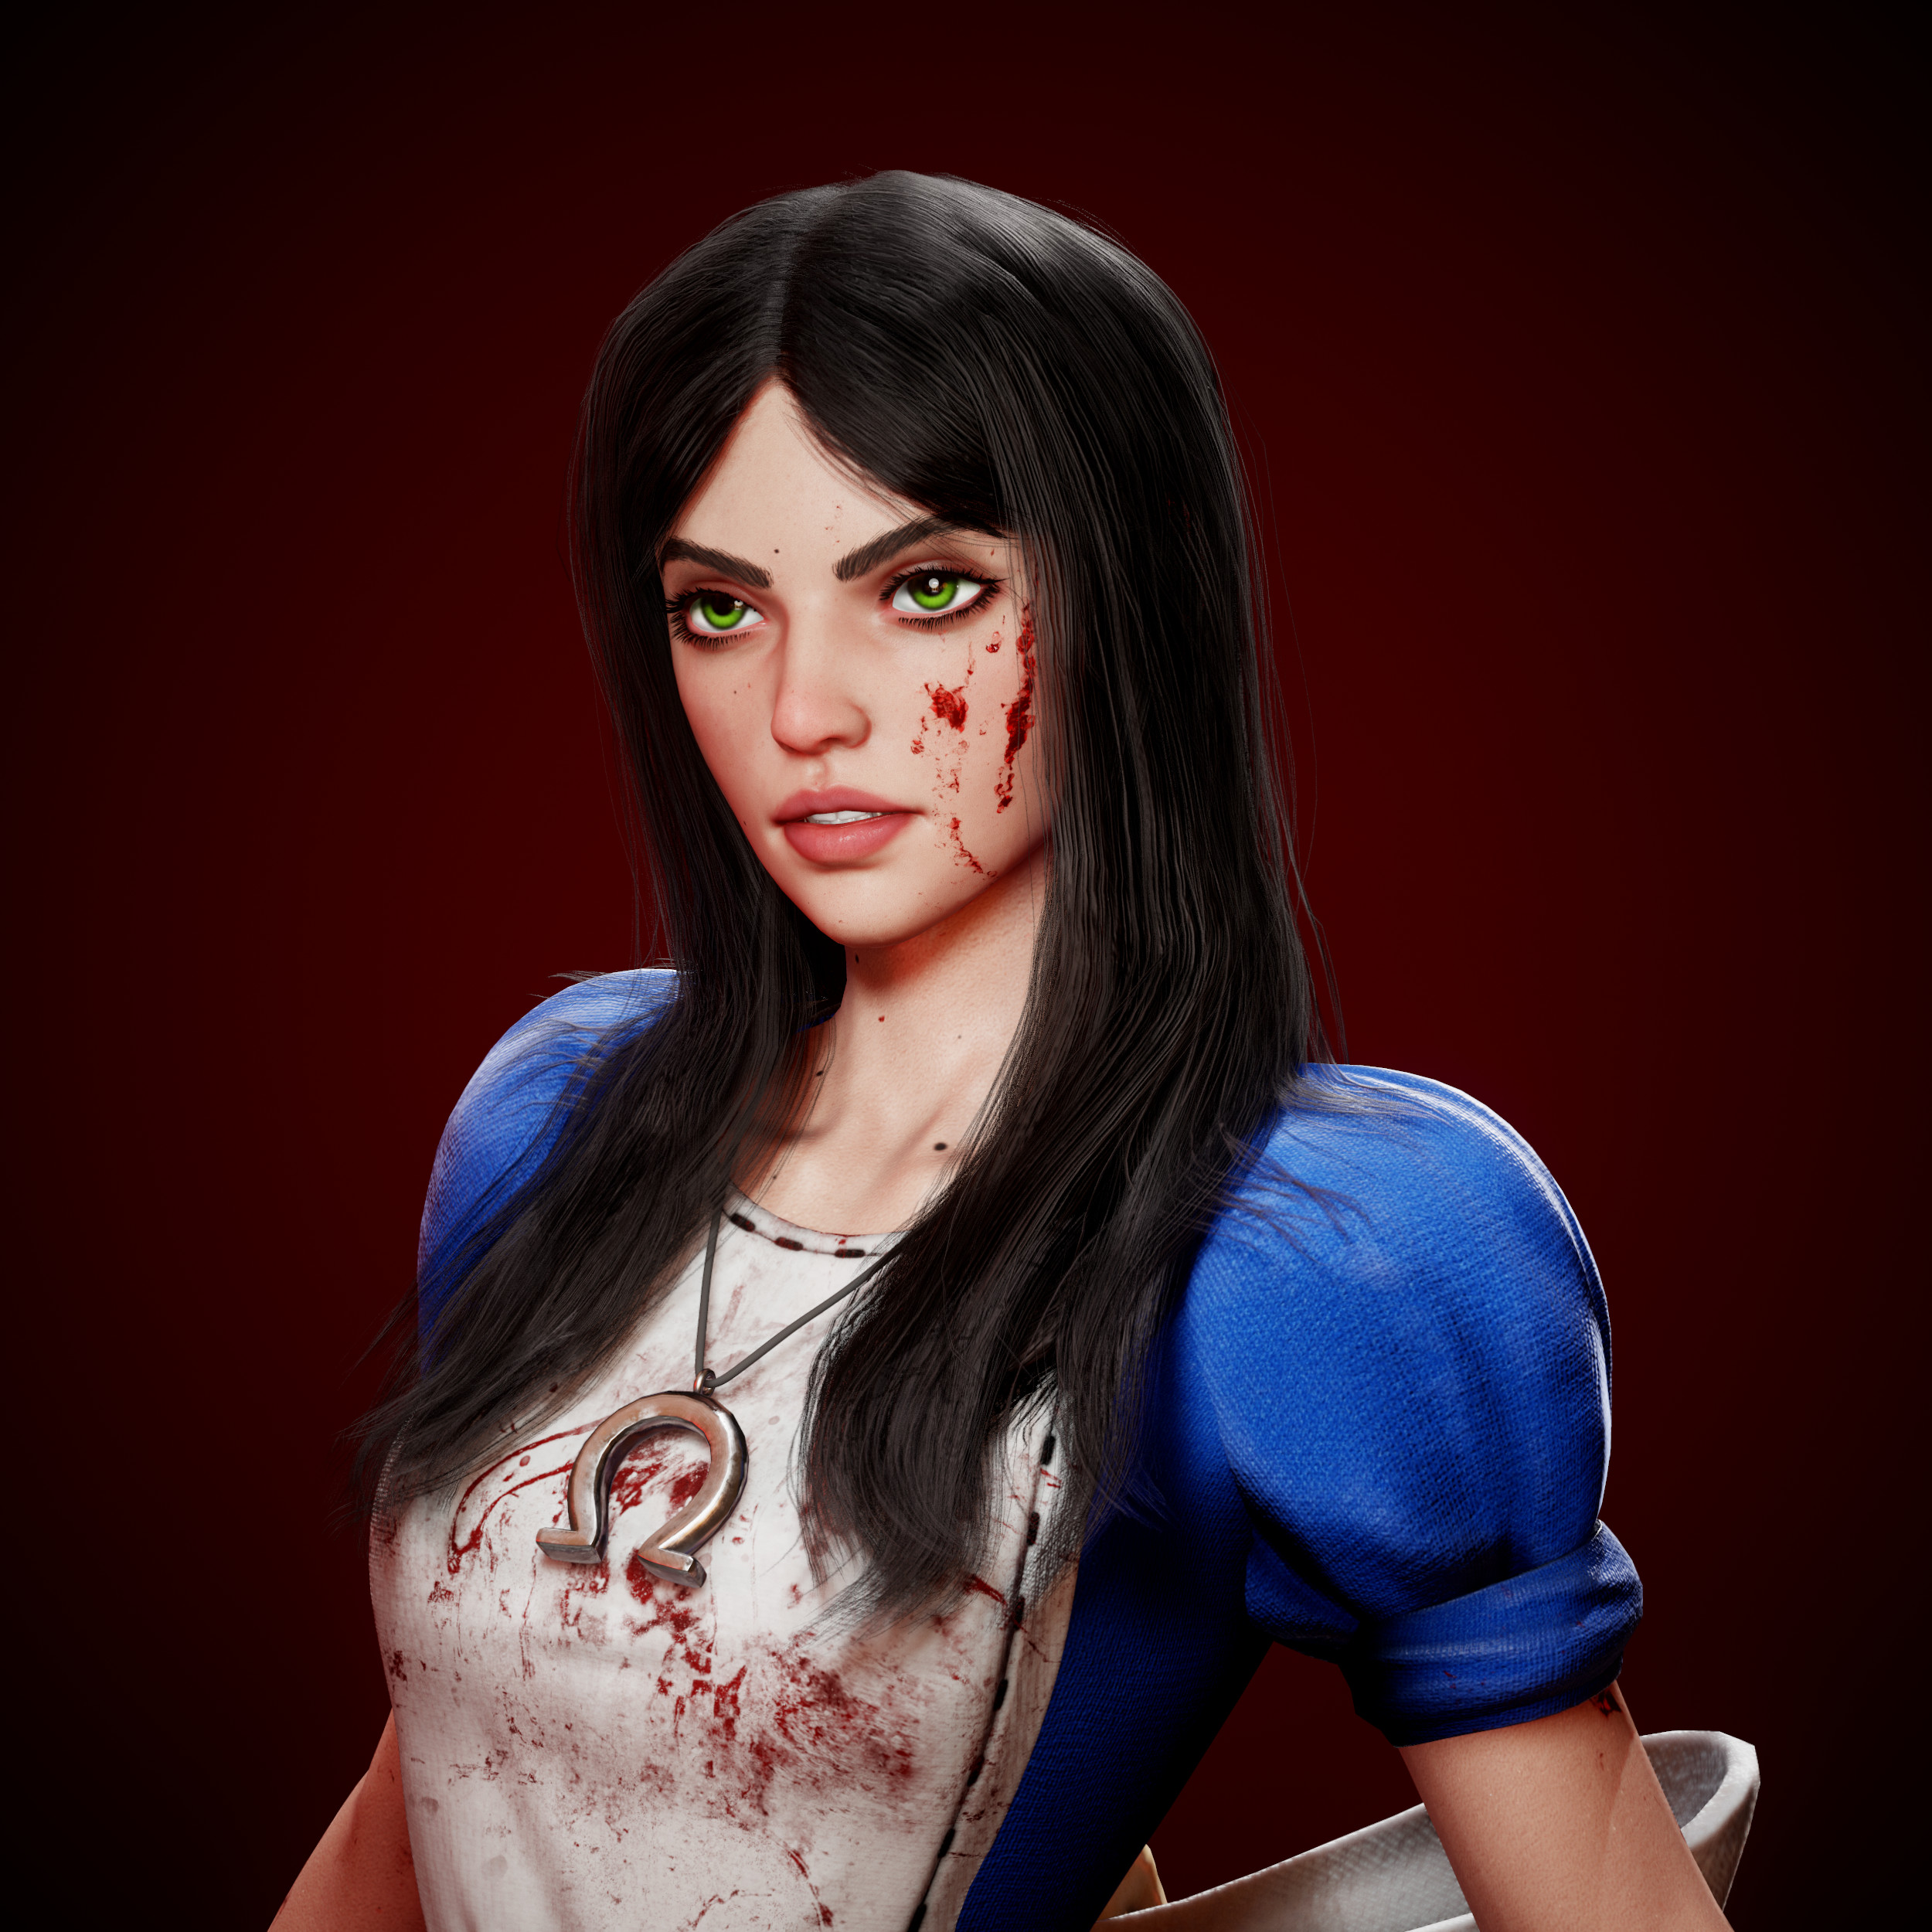 Recreating American McGee's Alice in ZBrush